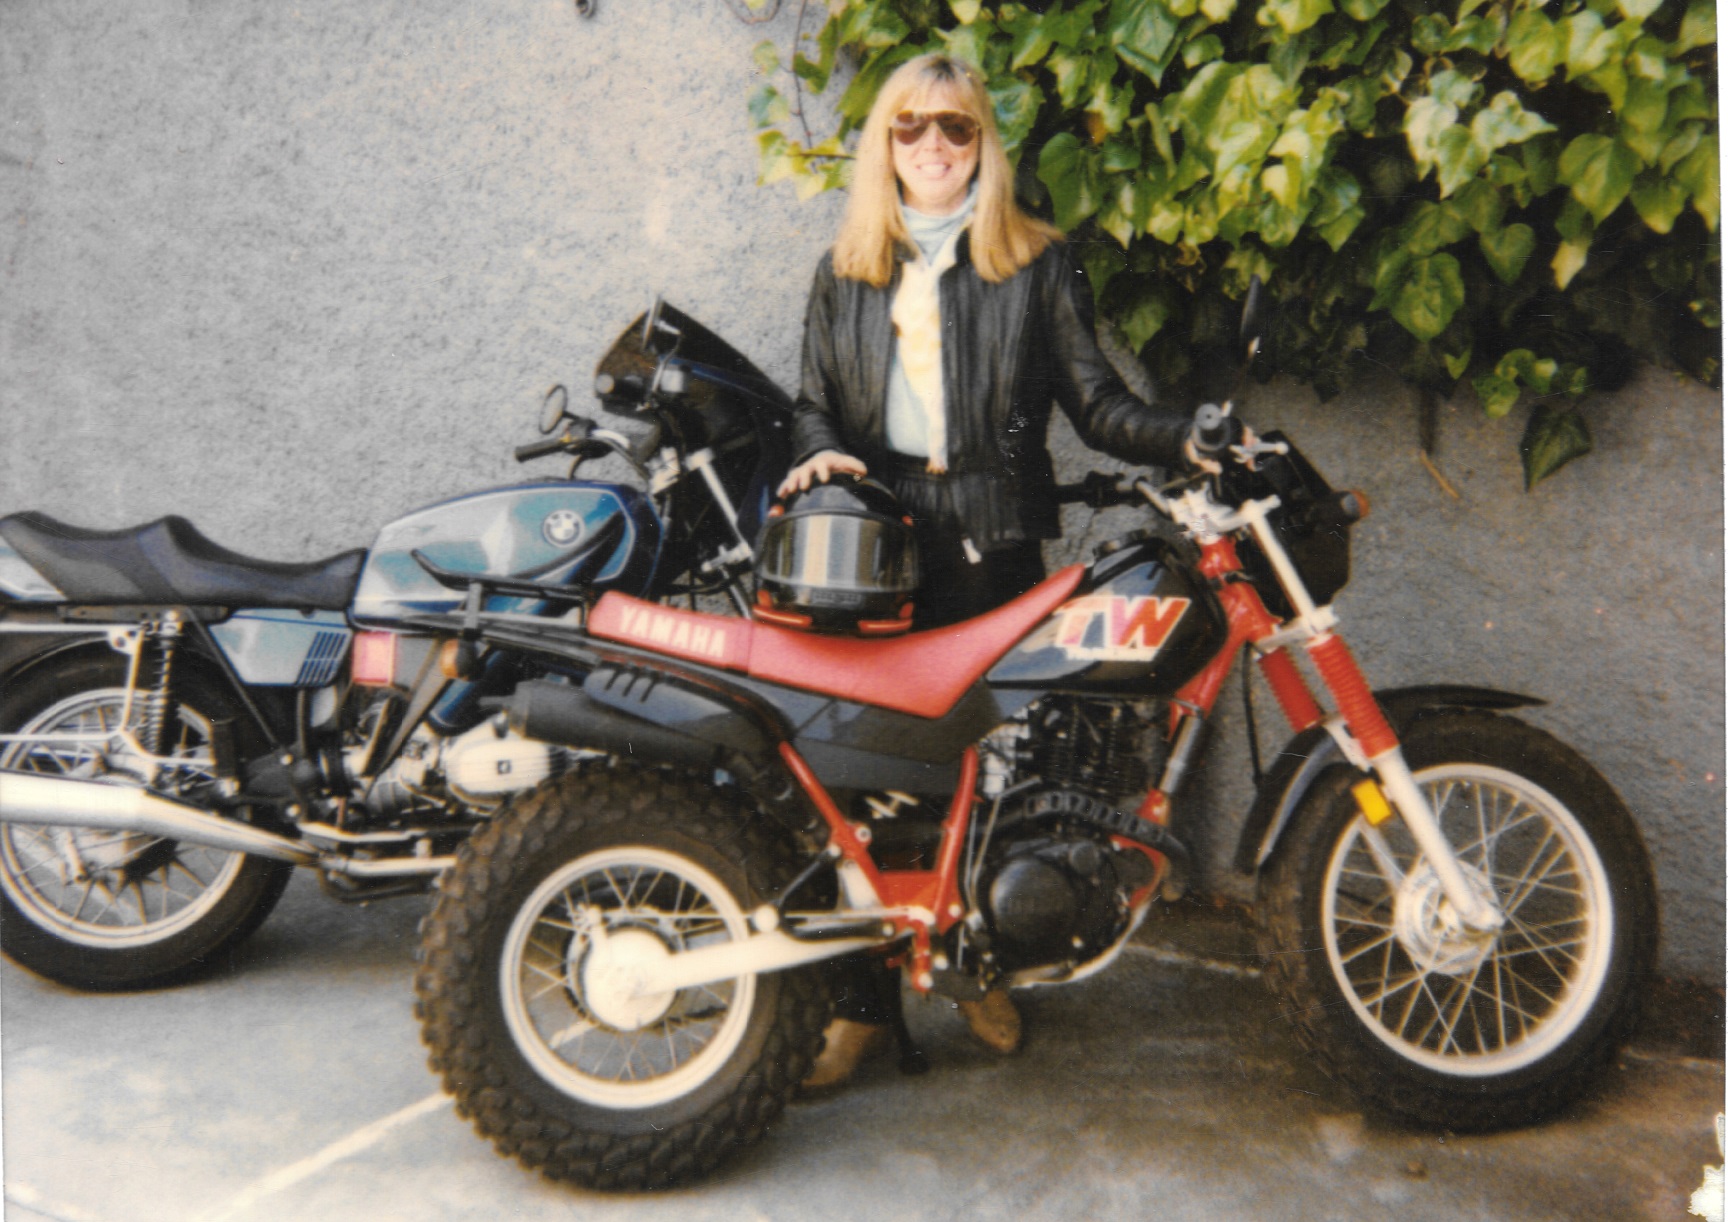 Many of us relate to learning to ride and Dodwell’s newbie foibles. Here she is with her first motorcycles, and, as she puts it, “That first ride involved one stop sign which I managed to get through doing about ten miles an hour while thinking I’m doing forty. I came to a smooth stop and didn’t lay the bike down at any point in the ride. When I finally made it back home, I literally plunked myself down and went straight to bed. My hands ached, my feet ached, my ankles hurt, and I was just grateful I made it back in one piece.” (p. 91)